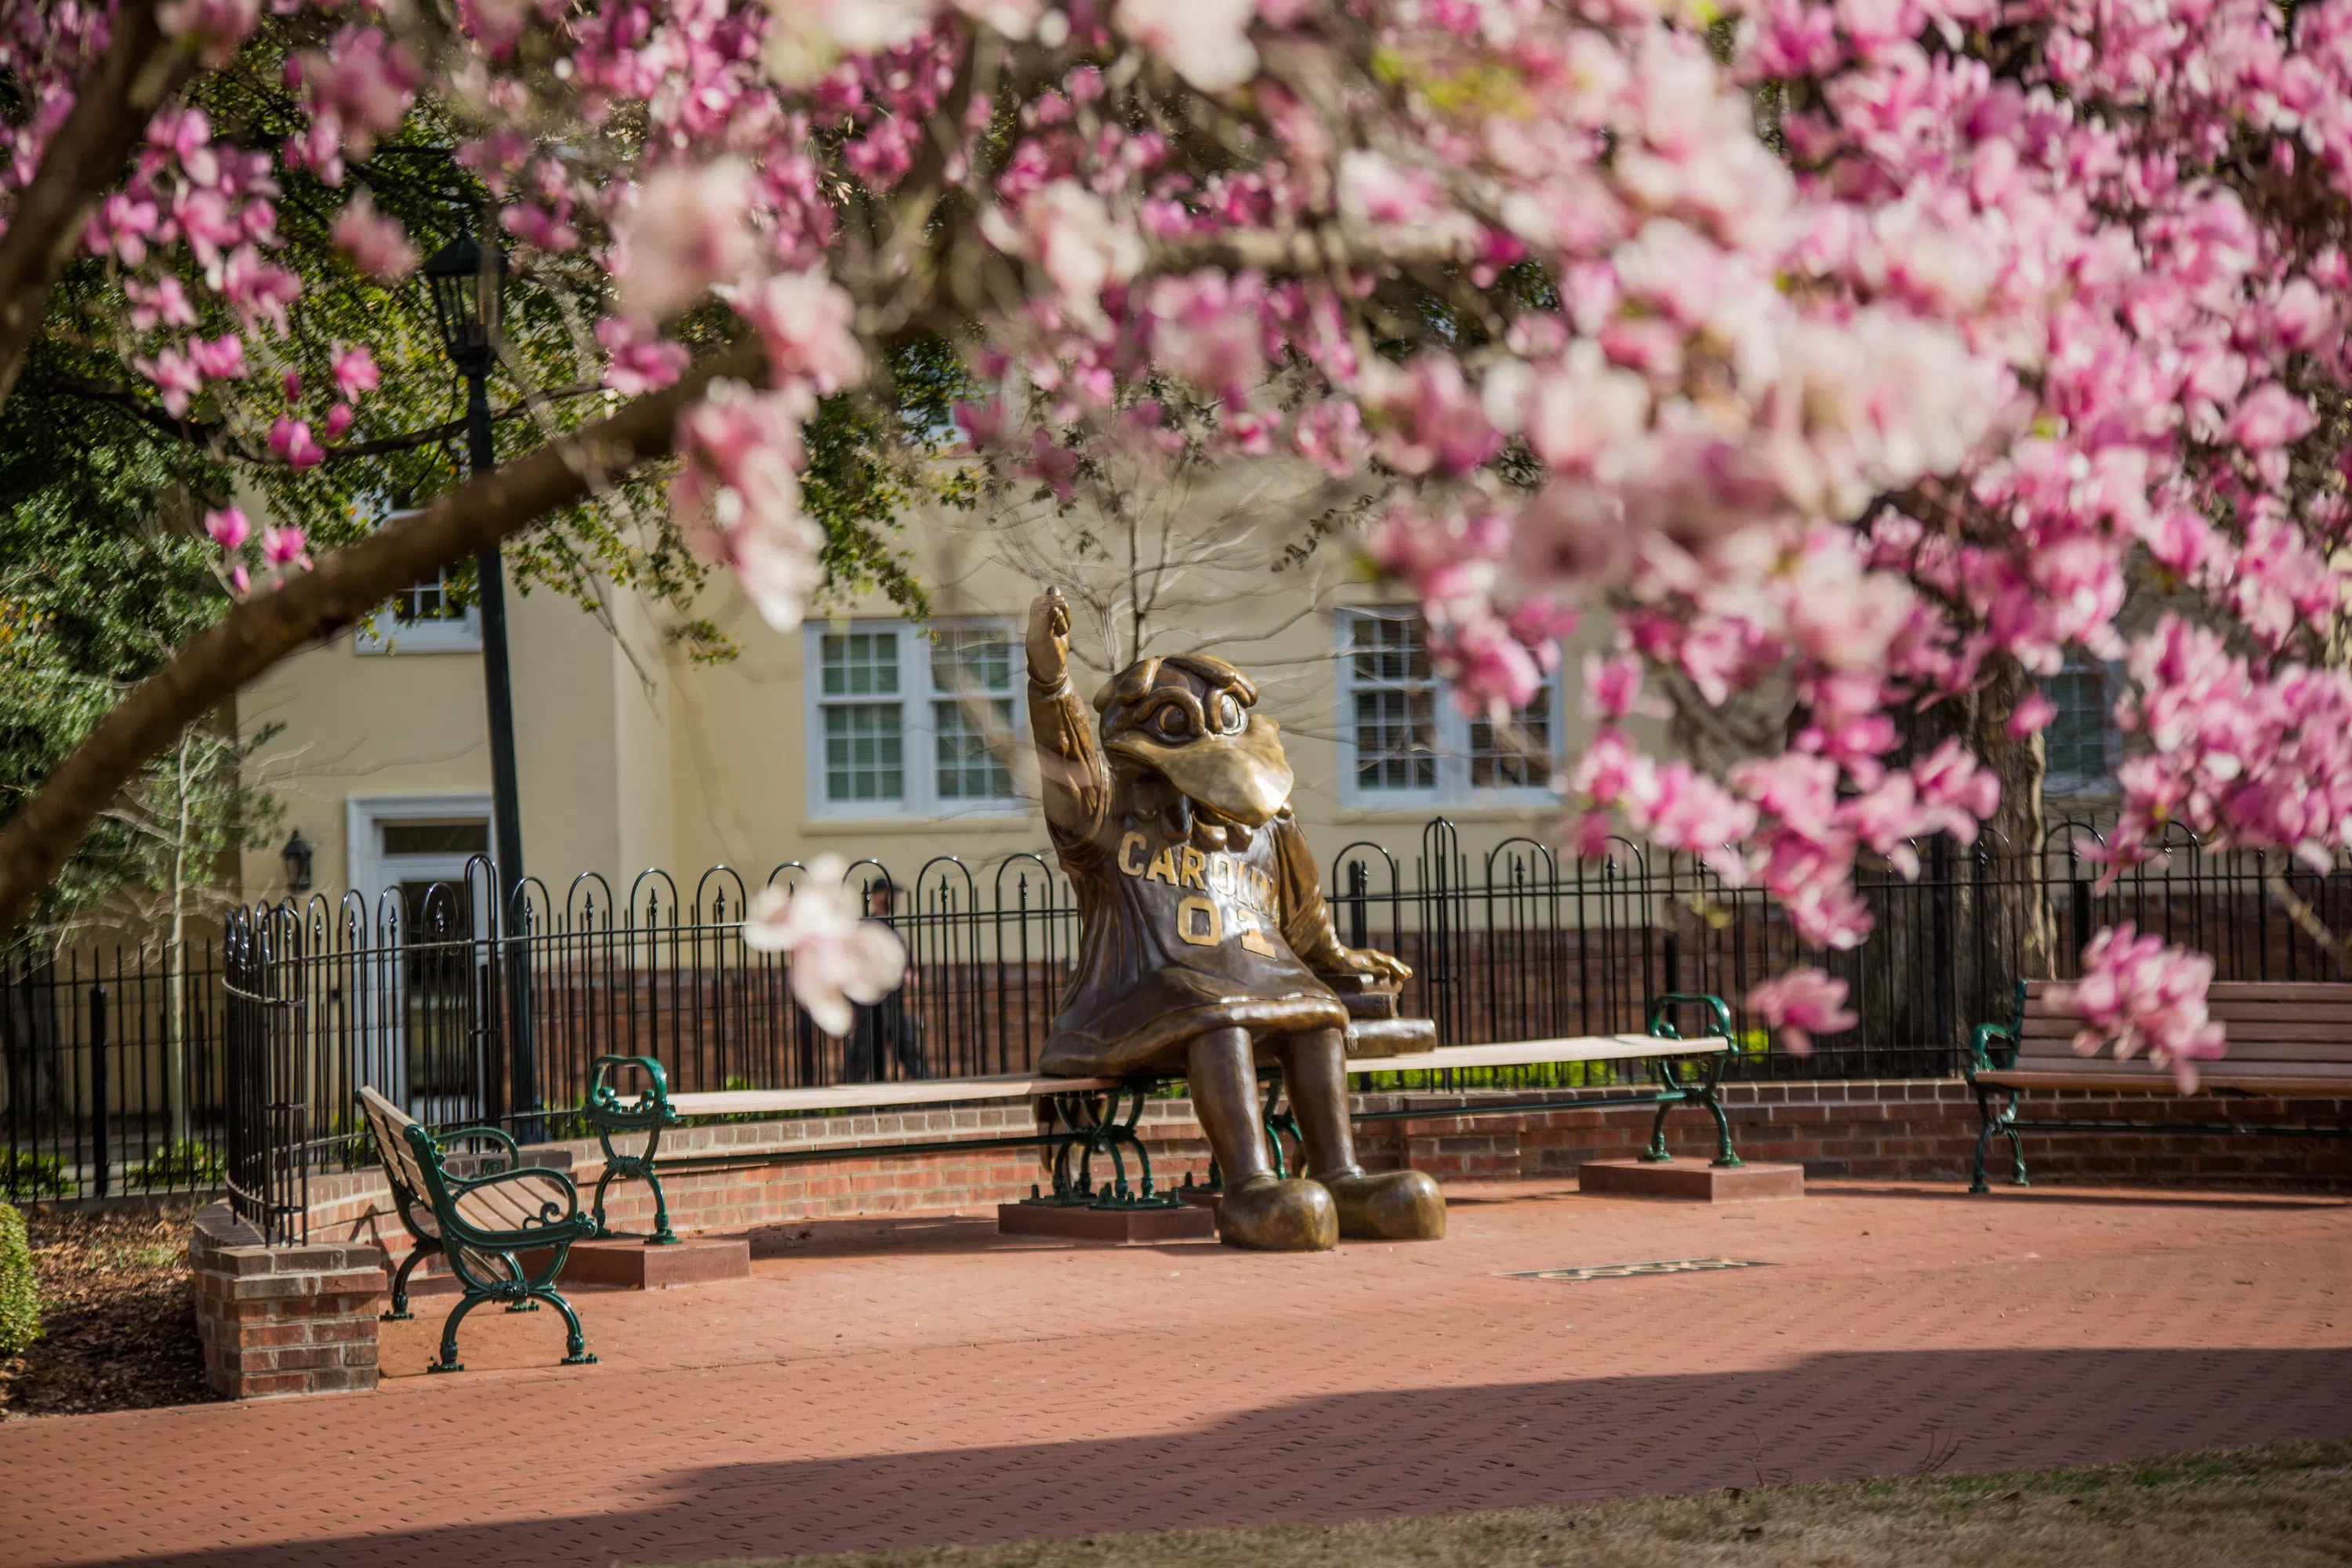 View of the Cocky Statue with pink flowers in the foreground